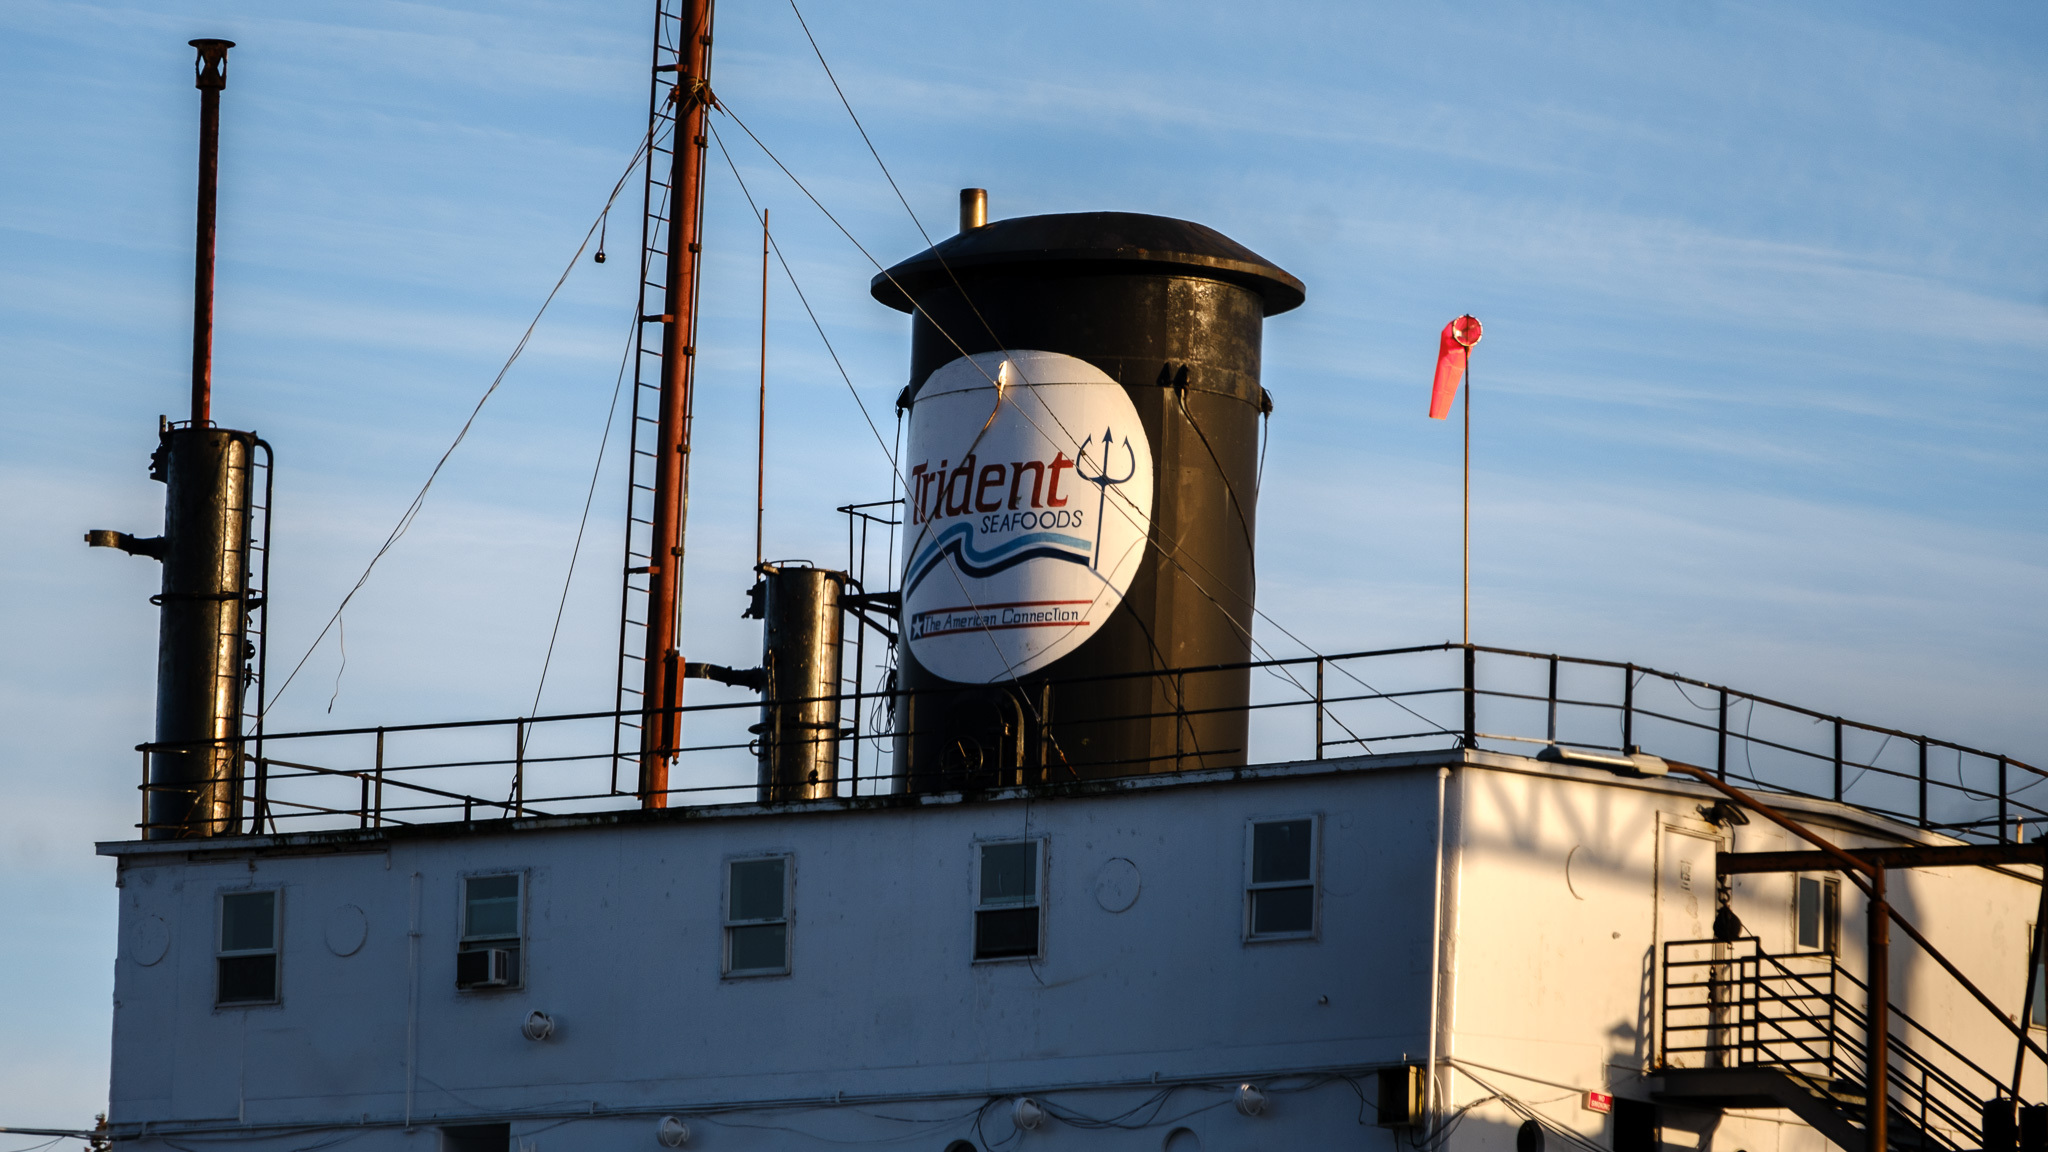 a square building with a large black chimney with a sign that reads "Trident Seafoods"